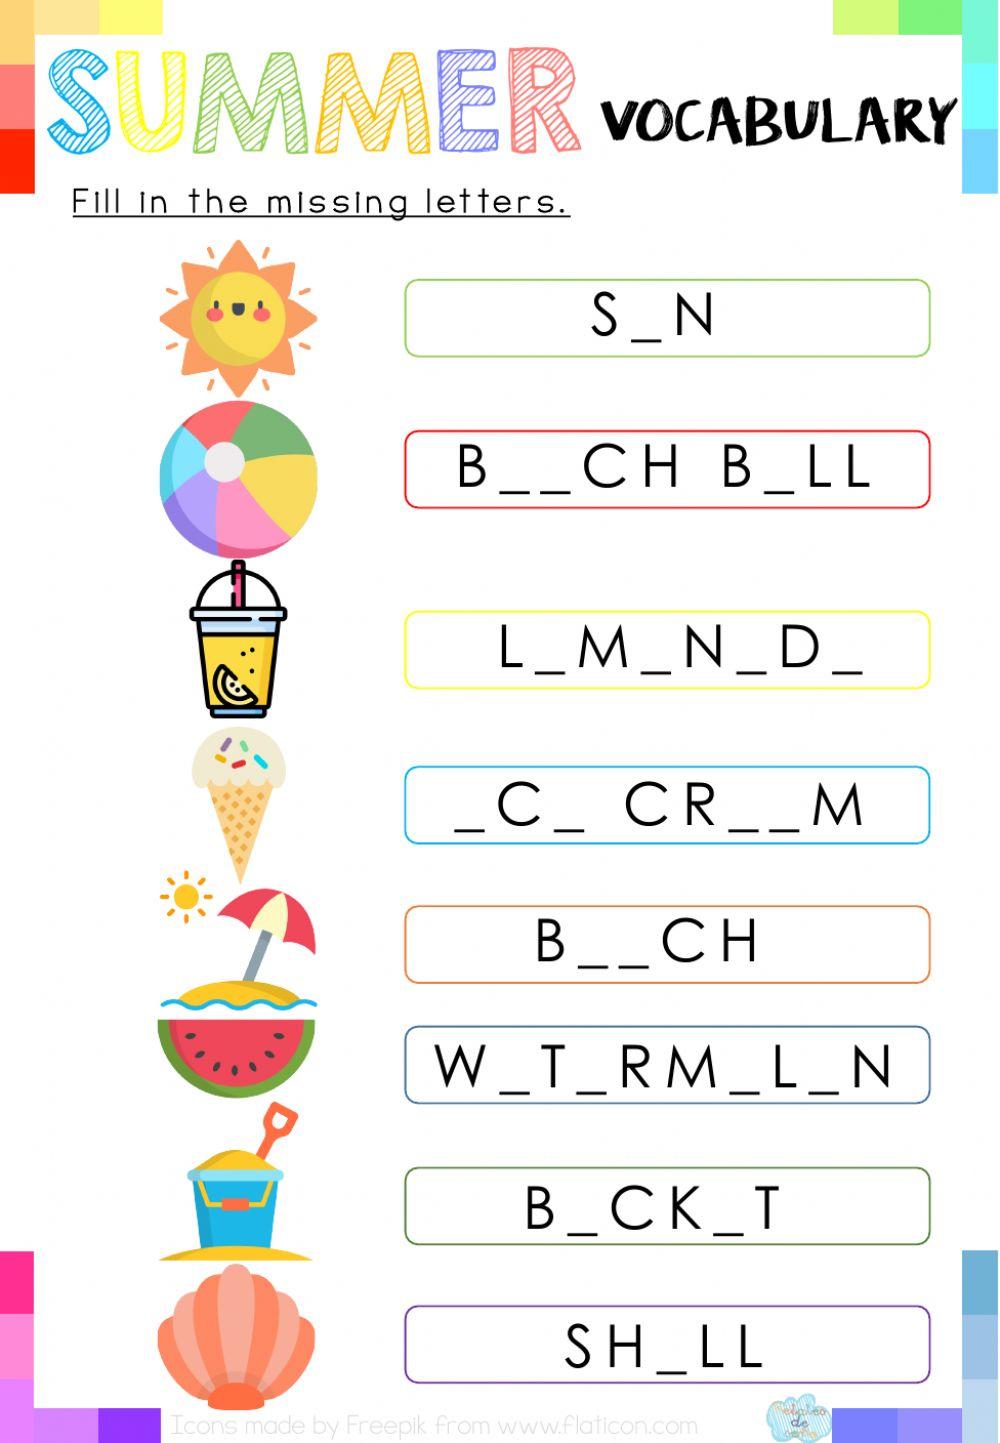 Fill in the missing letters: Summer Vocabulary